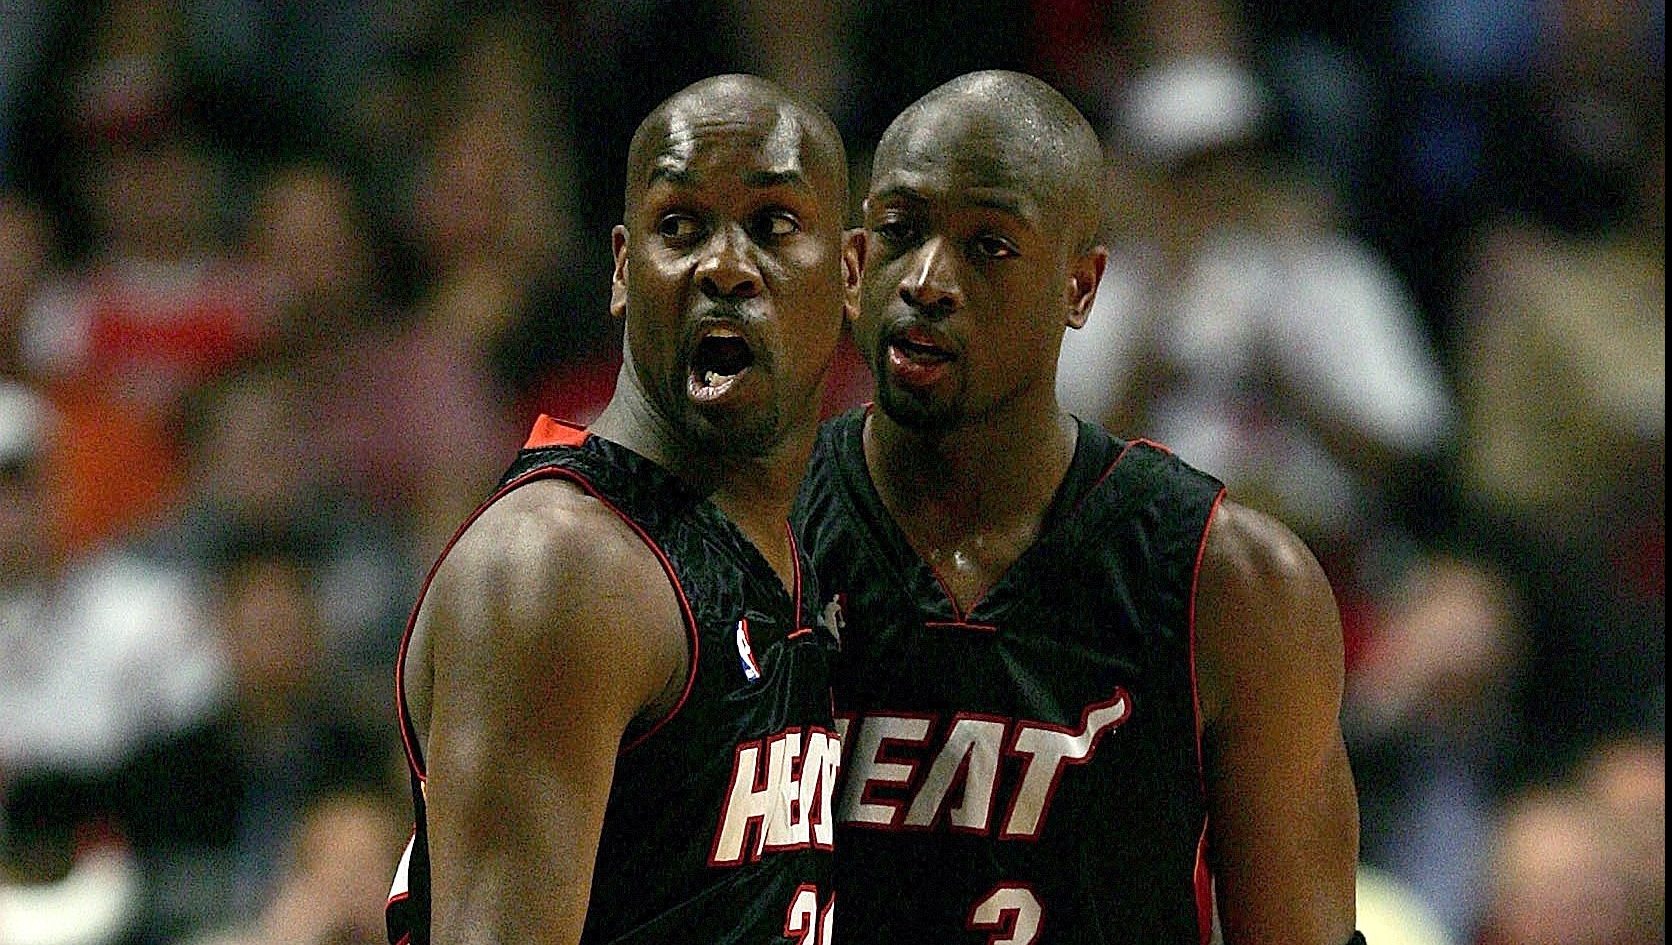 Gary Payton sounds off on Heat Culture, NBA Finals, and more